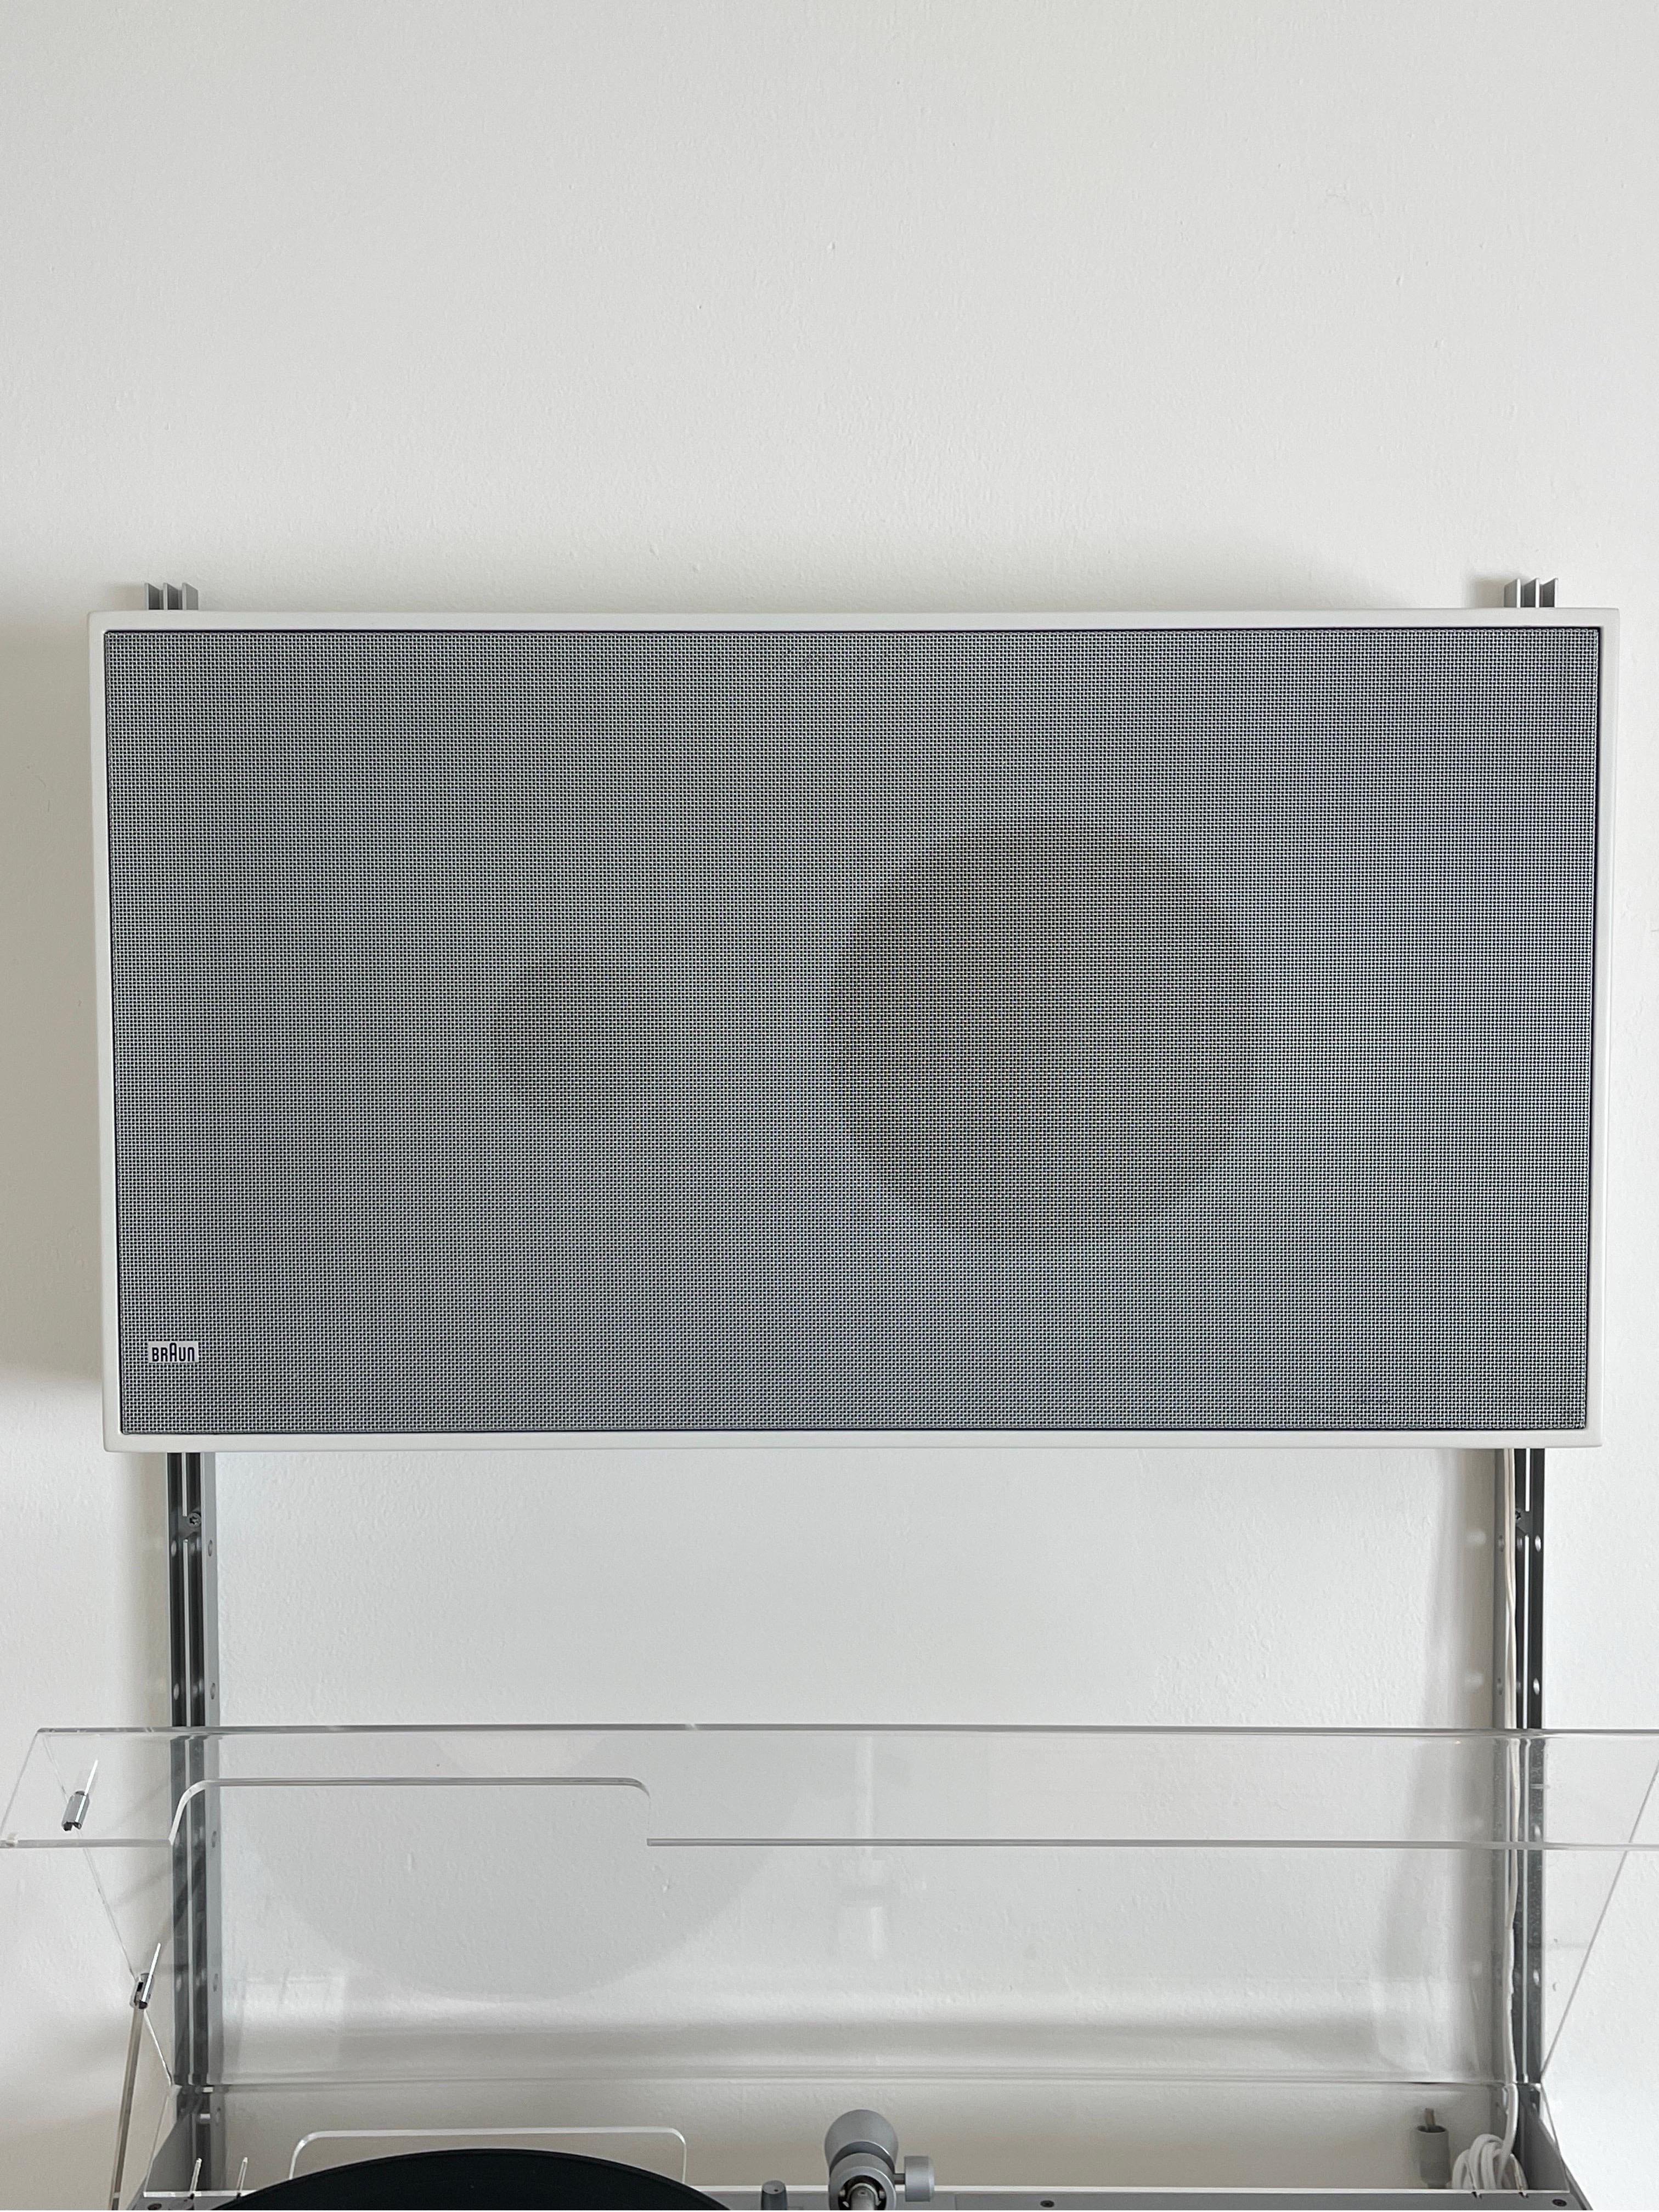 Braun Audio wall mounted audio system designed by Dieter Rams  In Good Condition For Sale In Los Angeles, CA